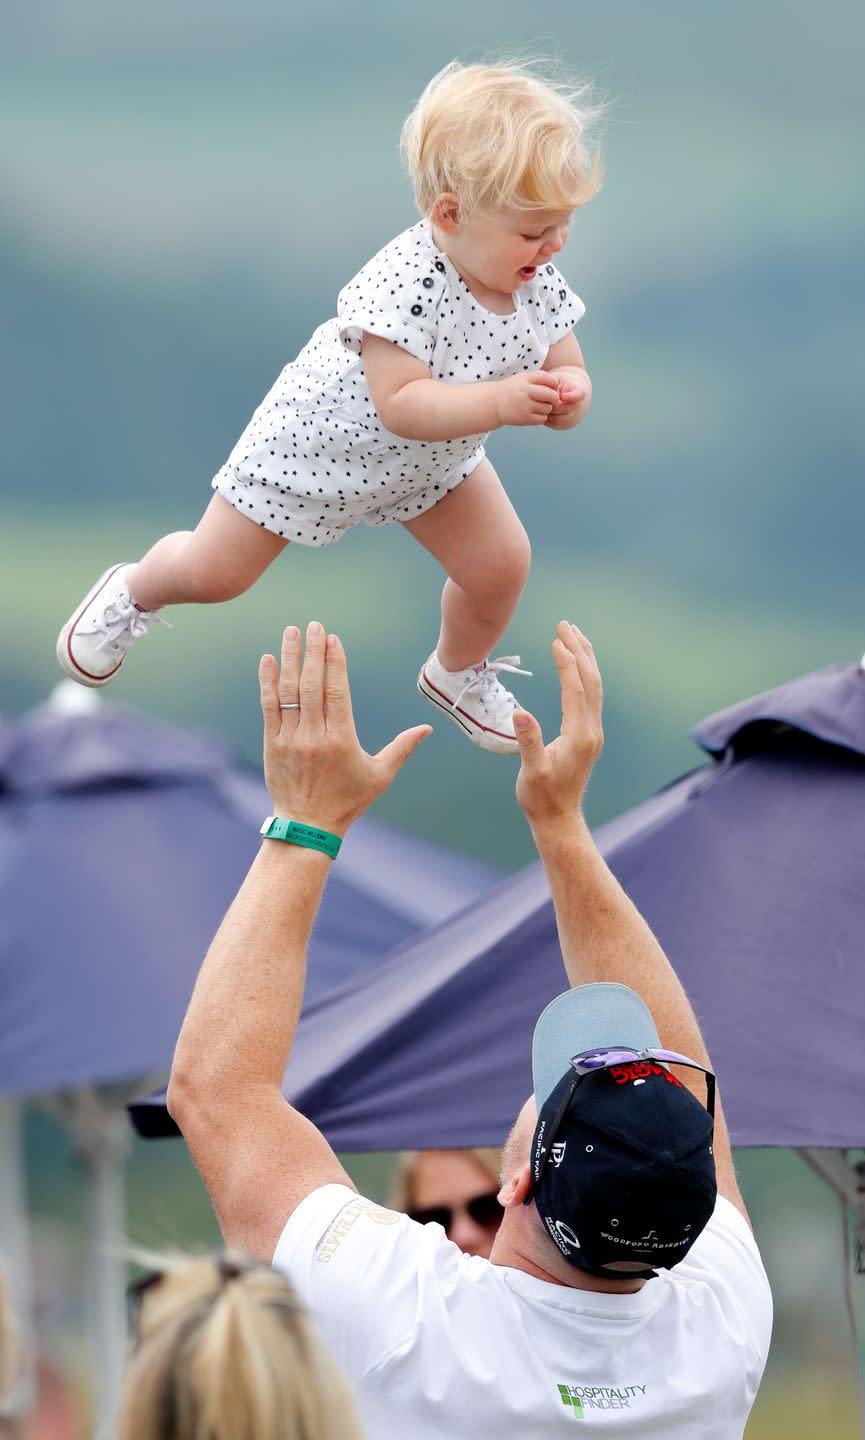 Tindall Tossed His Baby Daughter in the Air